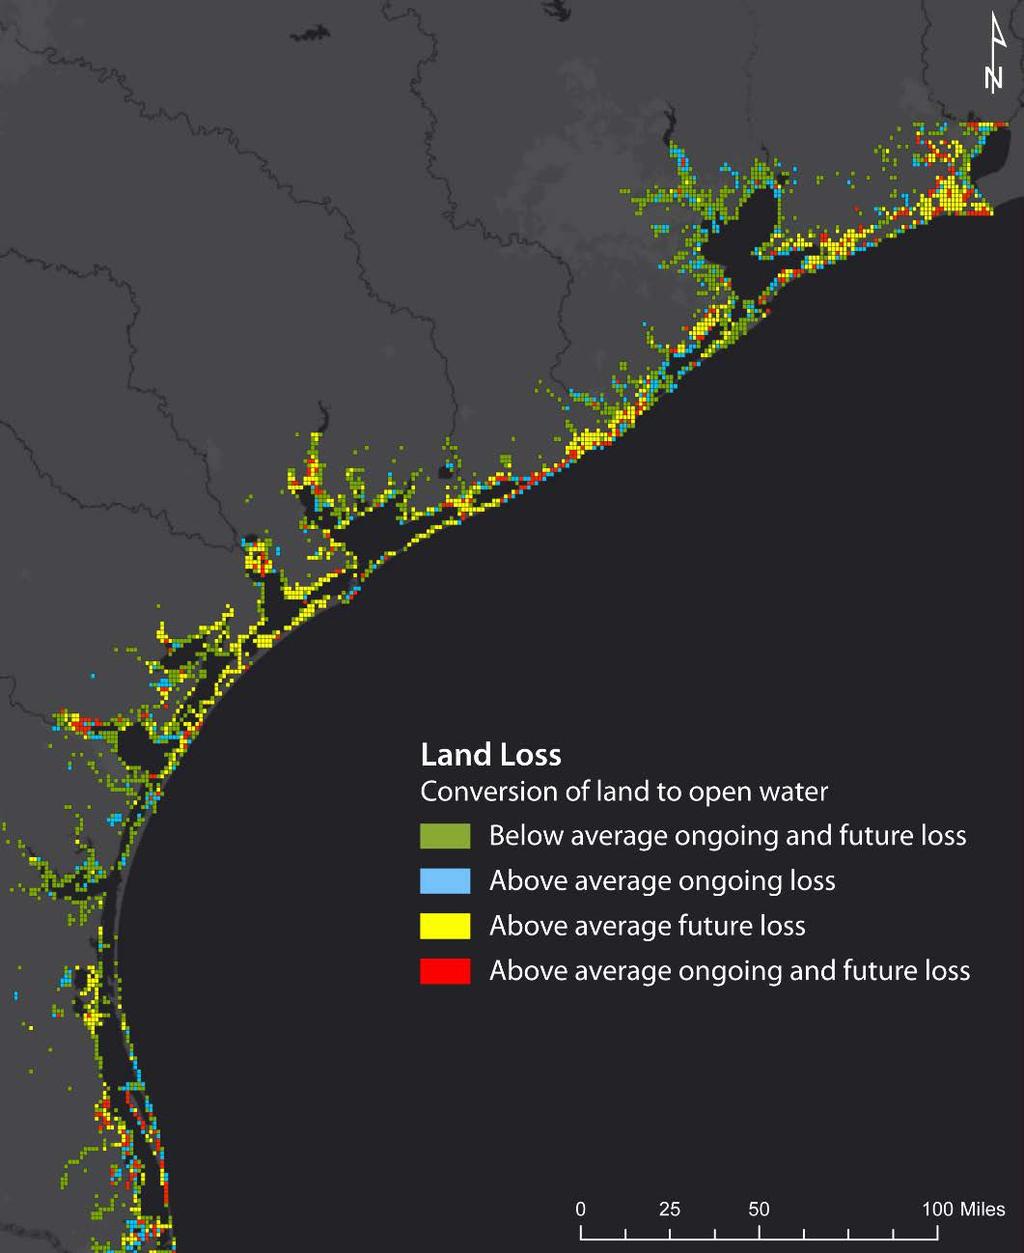 State of the Coastal Ecosystem Land Loss Houston Beaumont Sabine Lake Galveston Bay Victoria Upper Coast Ongoing: 272 ac/yr Conversion of land to open water Matagorda Bay Below average ongoing &